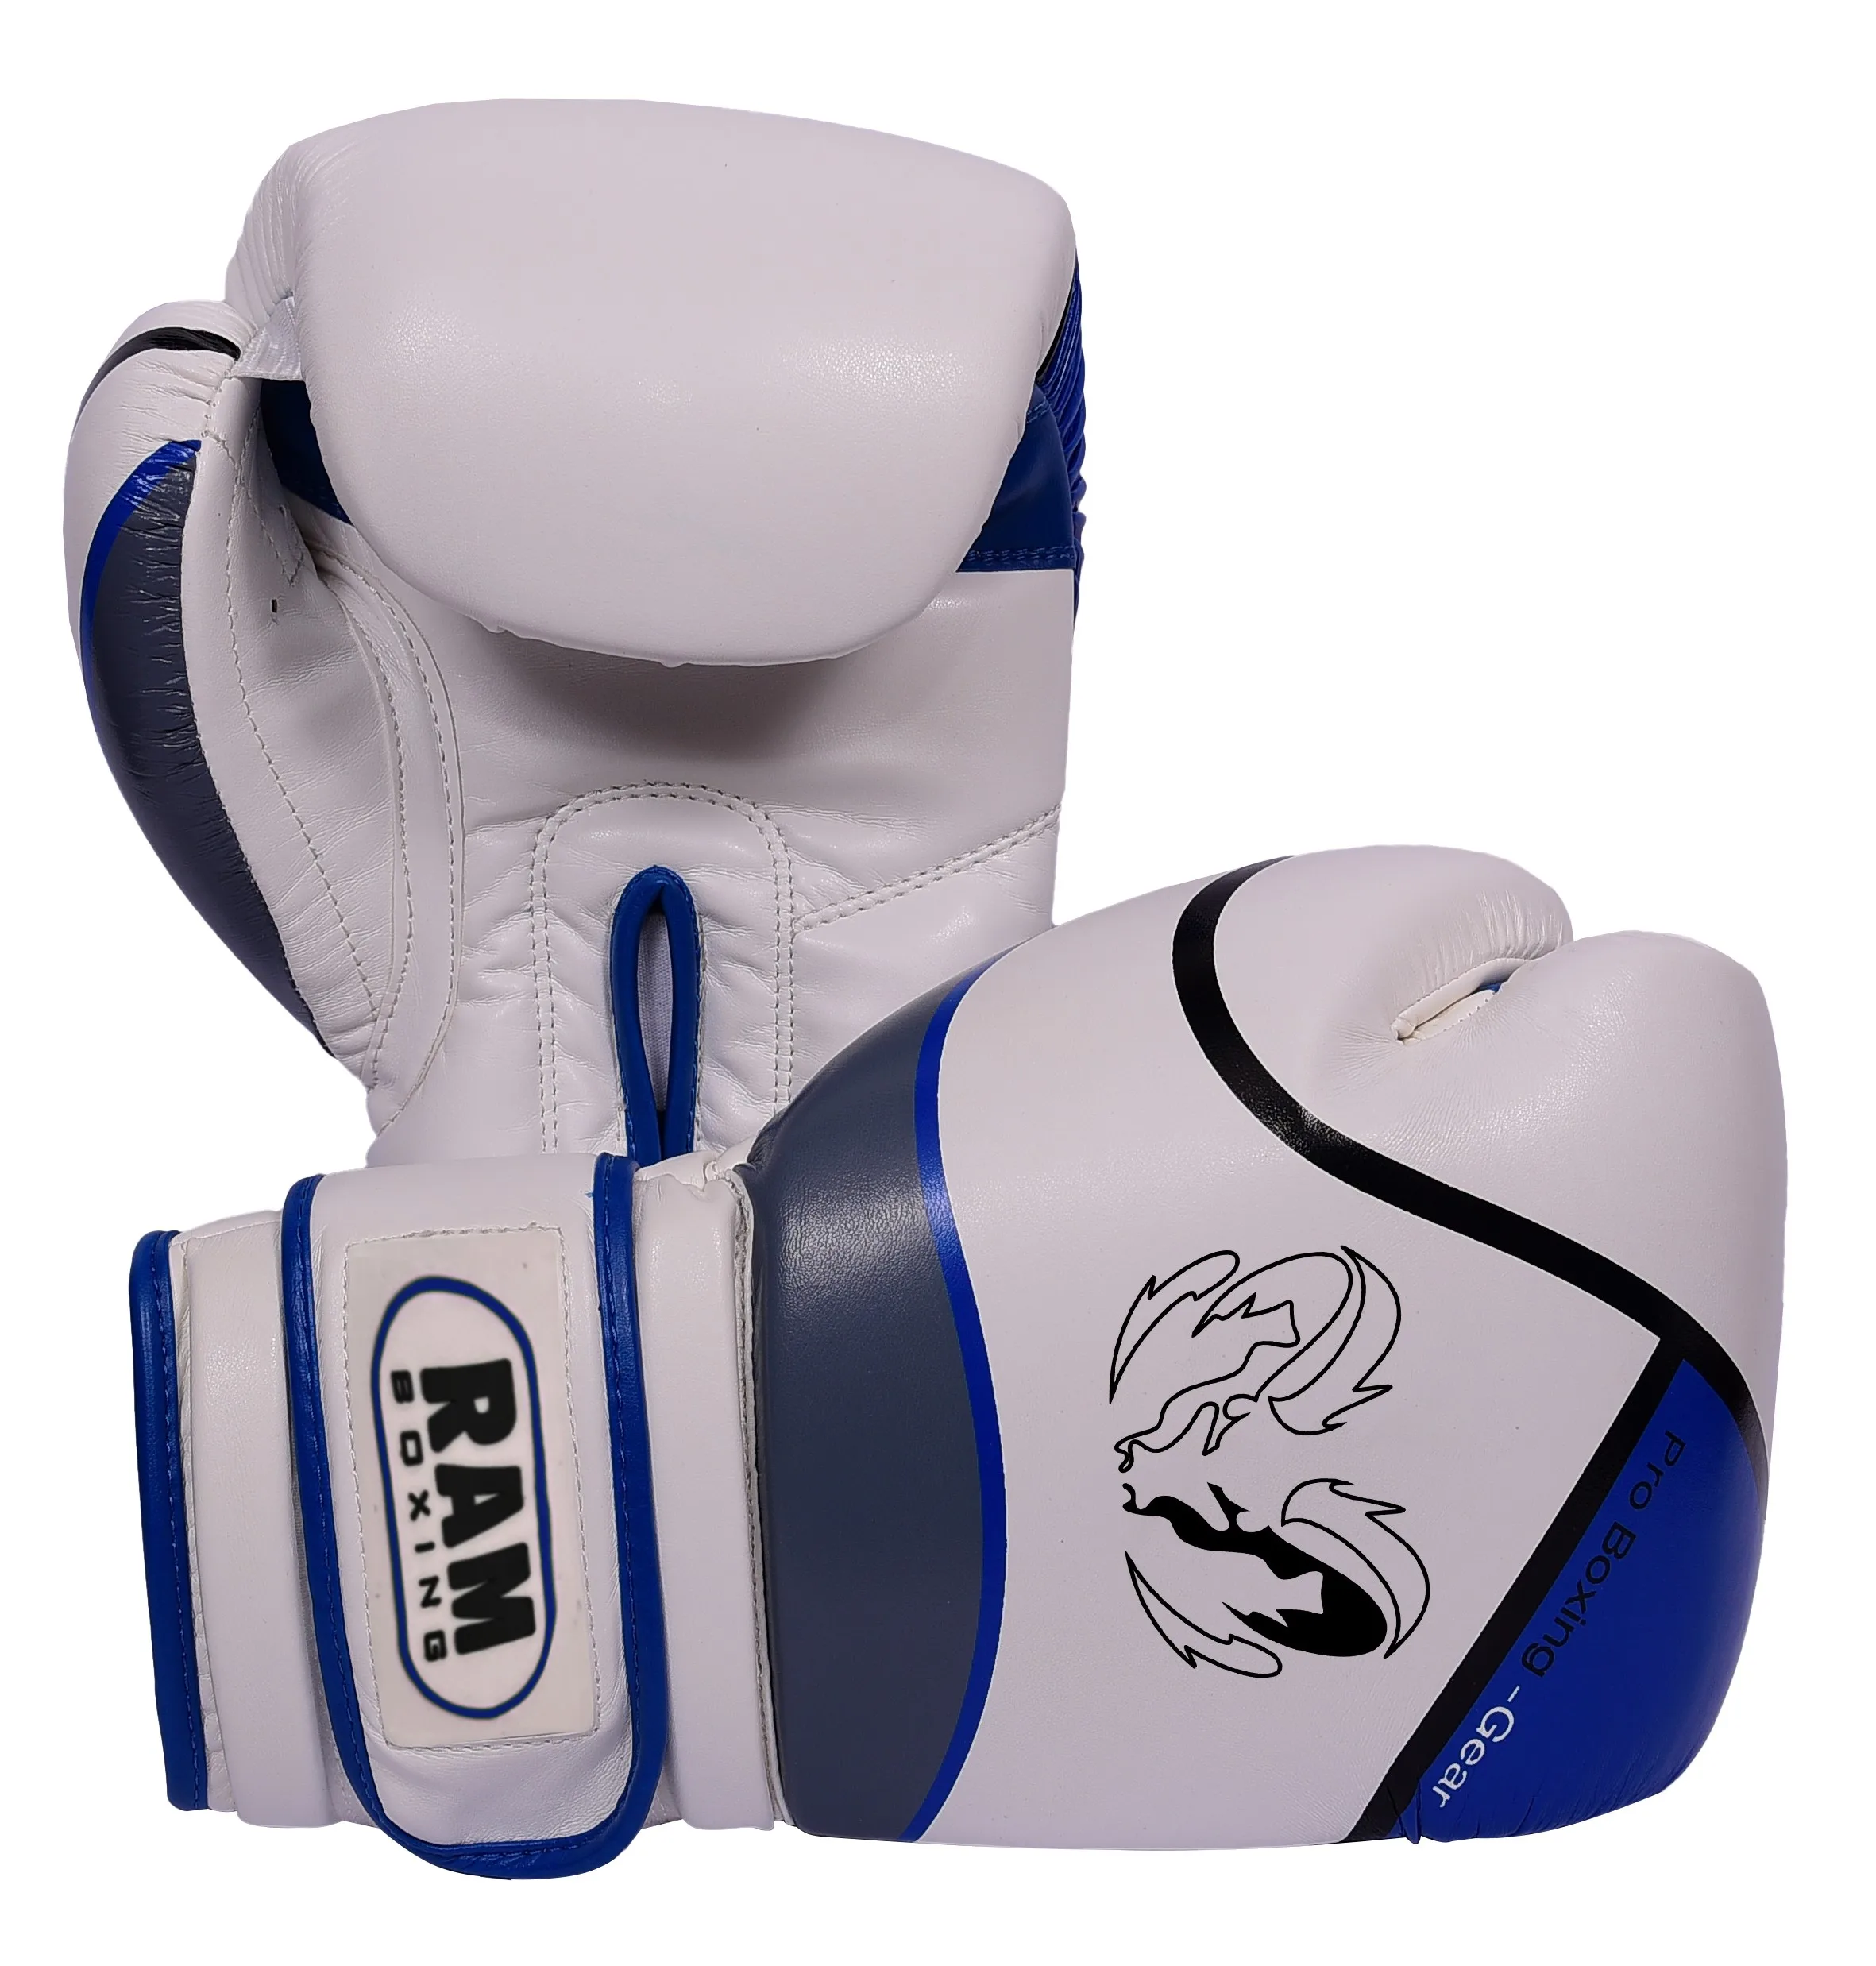 Pro Leather Boxing Gloves,MMA,Sparring Punch Bag,Muay Thai Training Gloves 